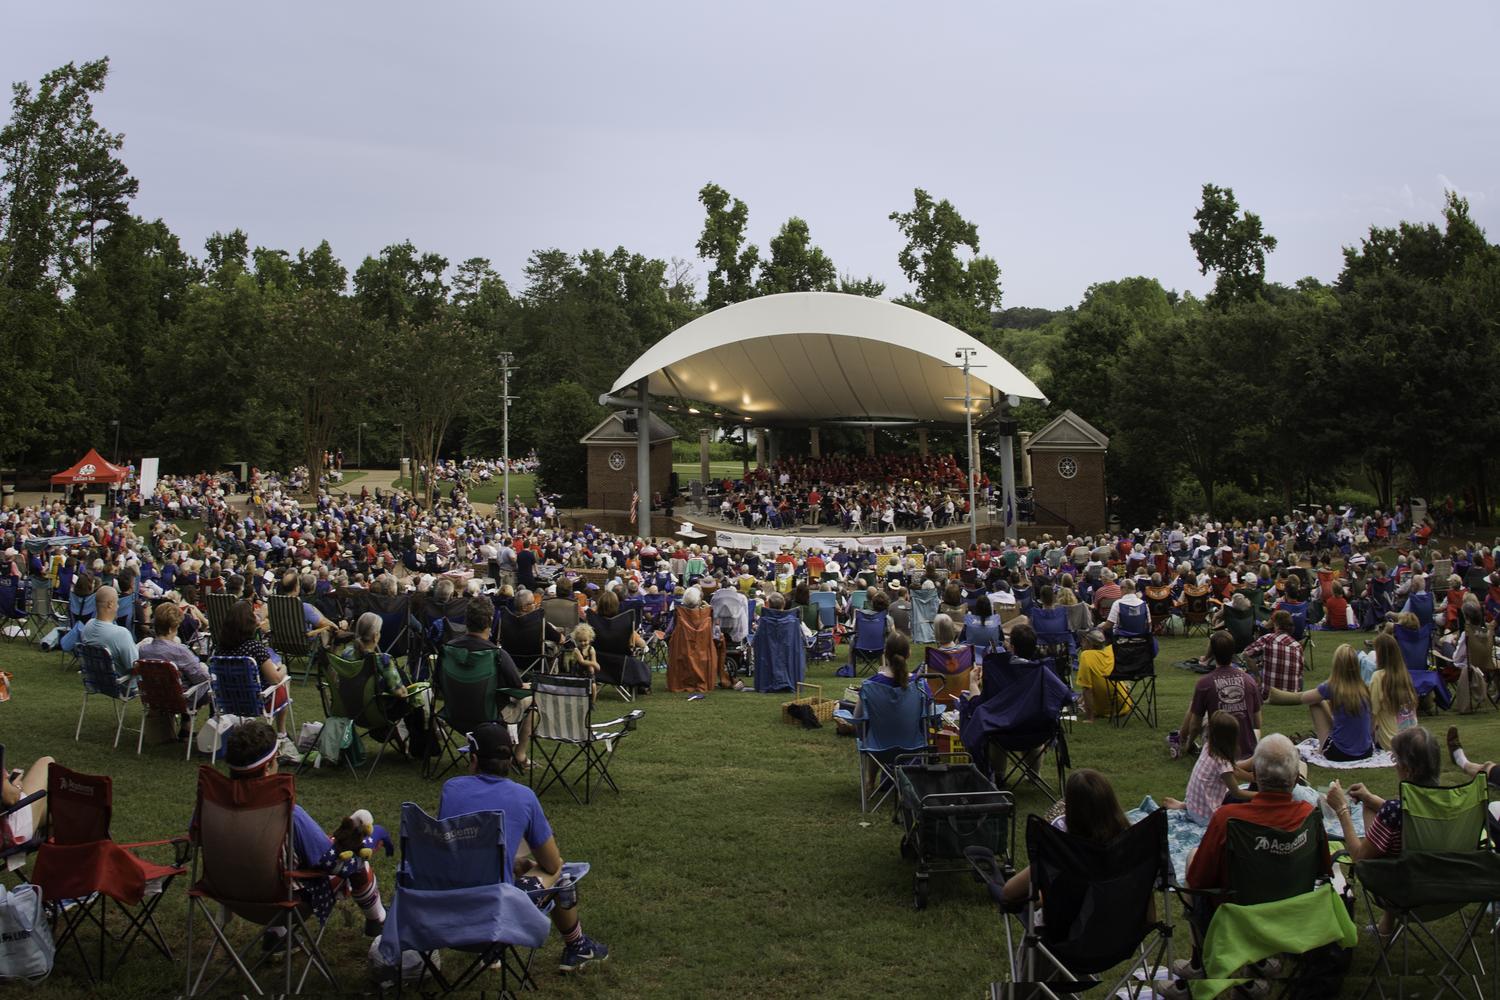 audience enjoys concert performed by musicians on amphitheater stage